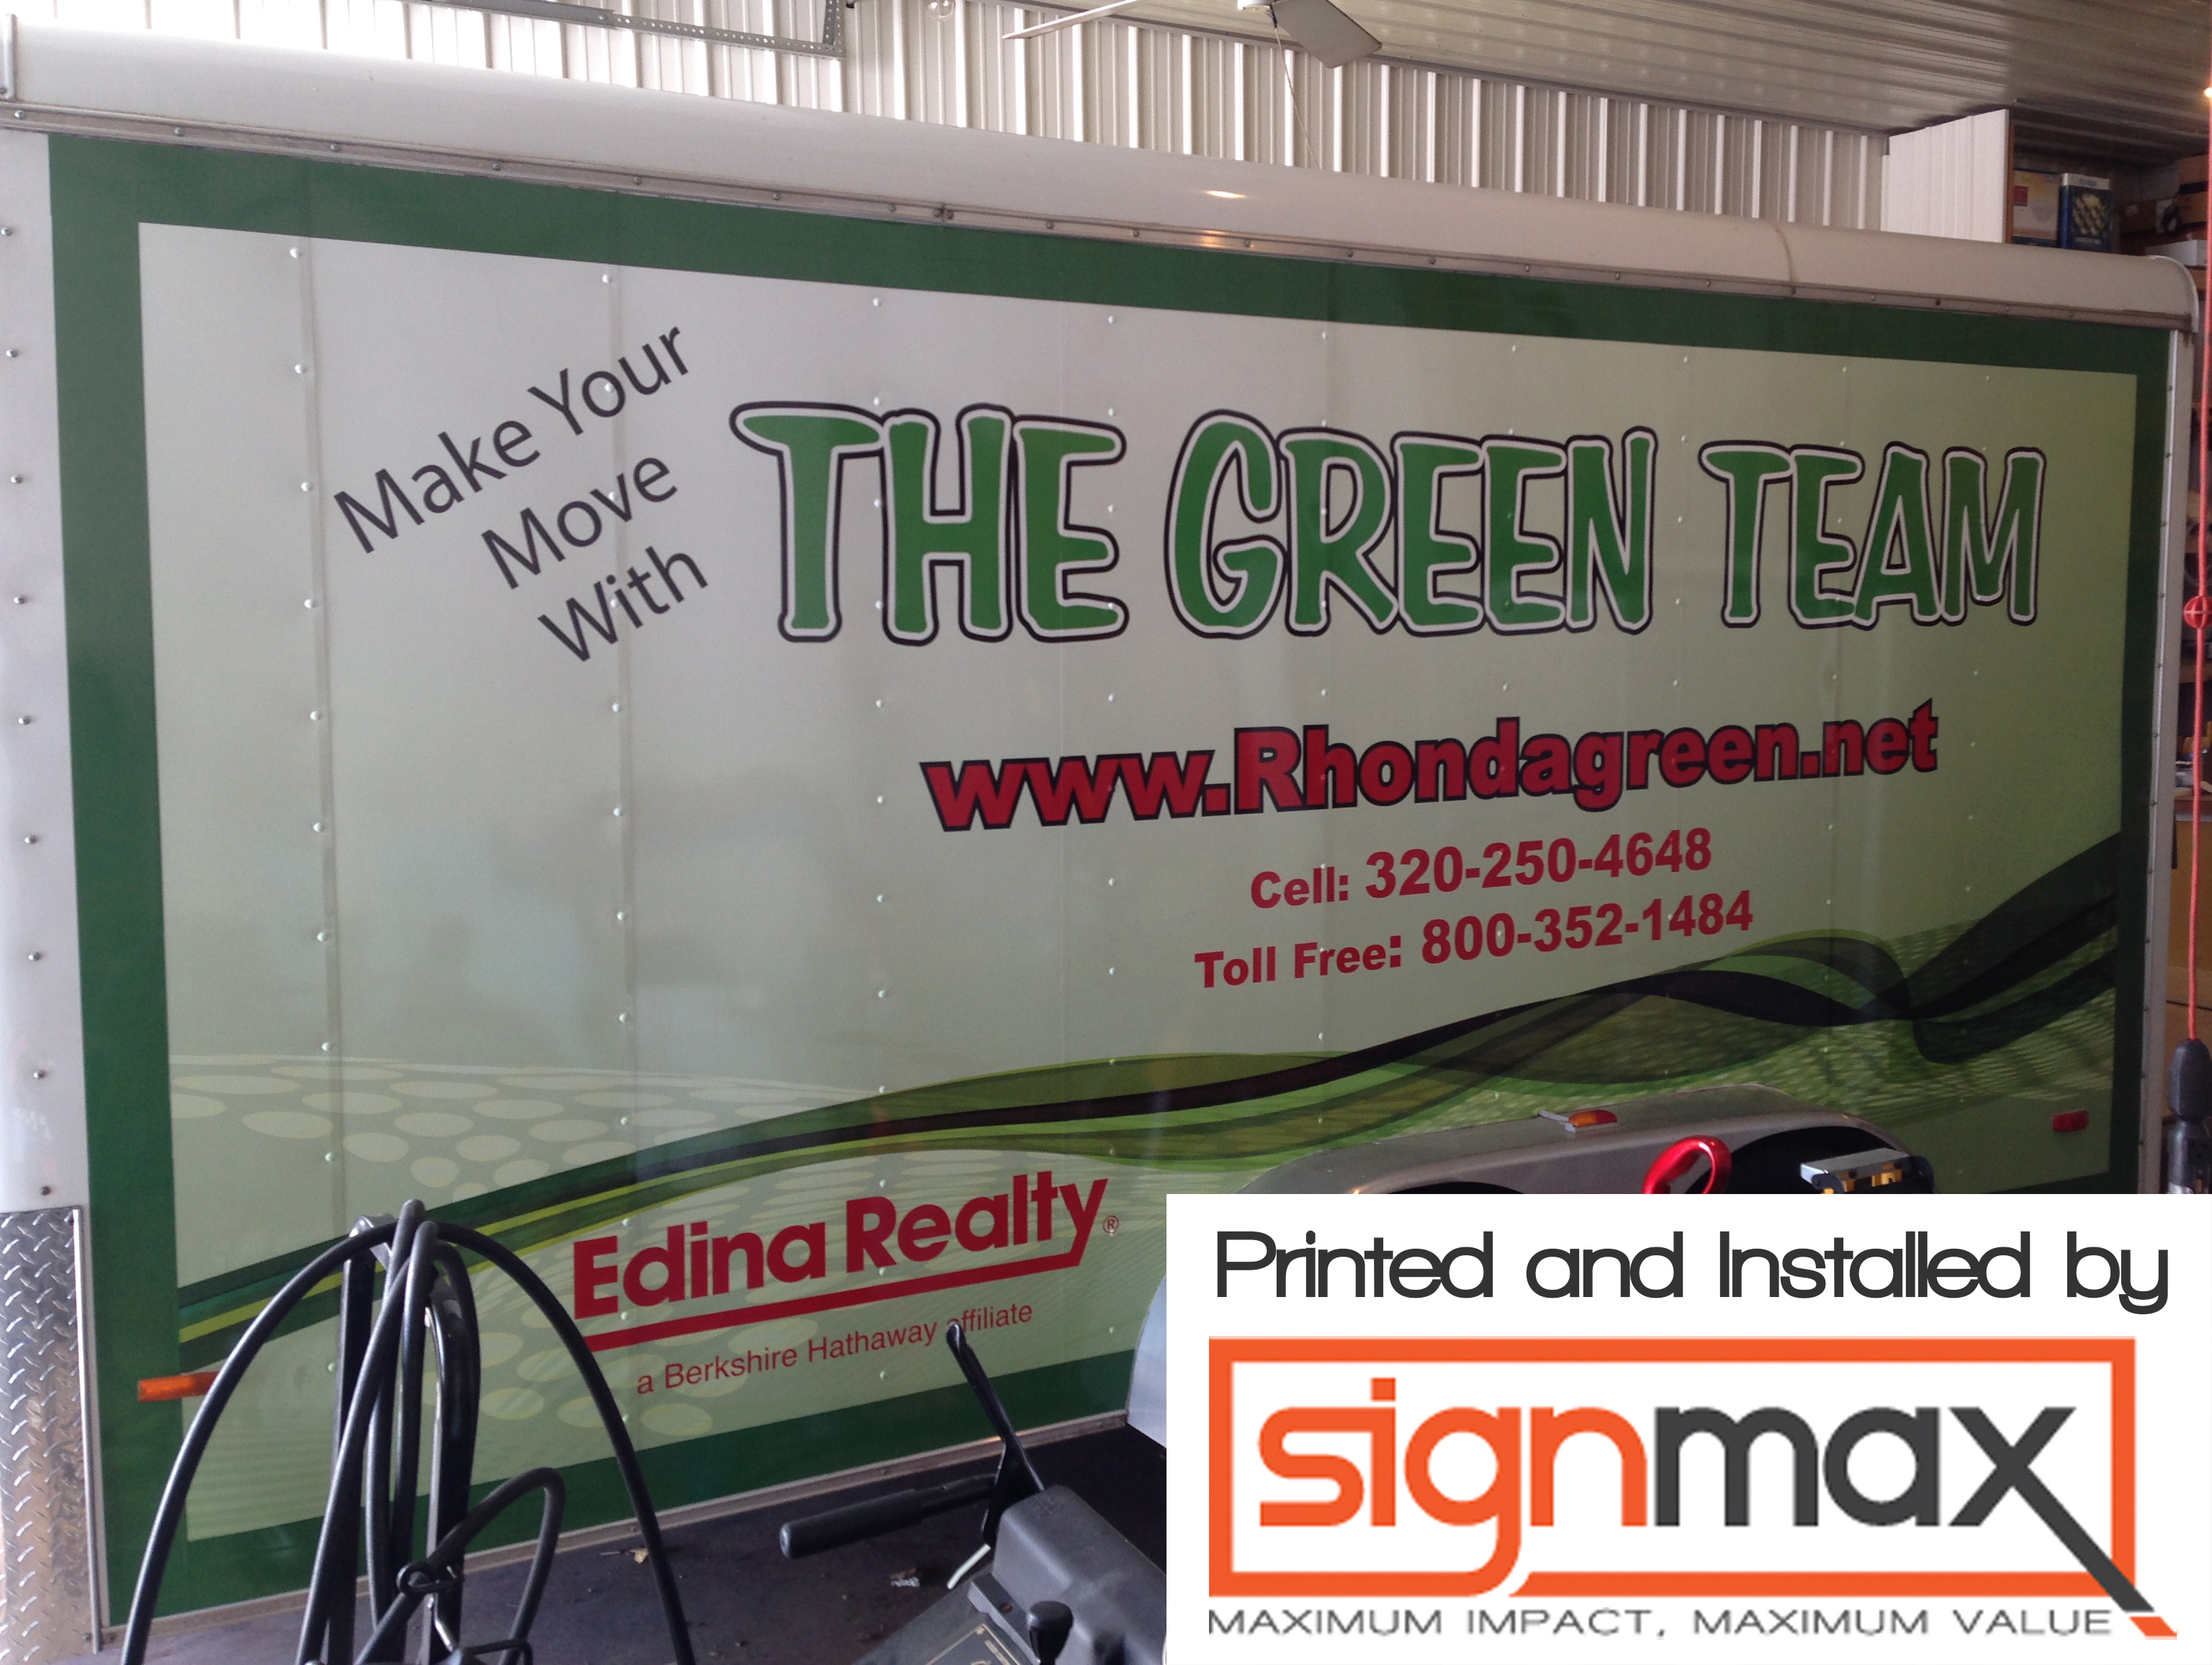 Edina Realty Trailer Wrap - Printed & Installed by Signmax